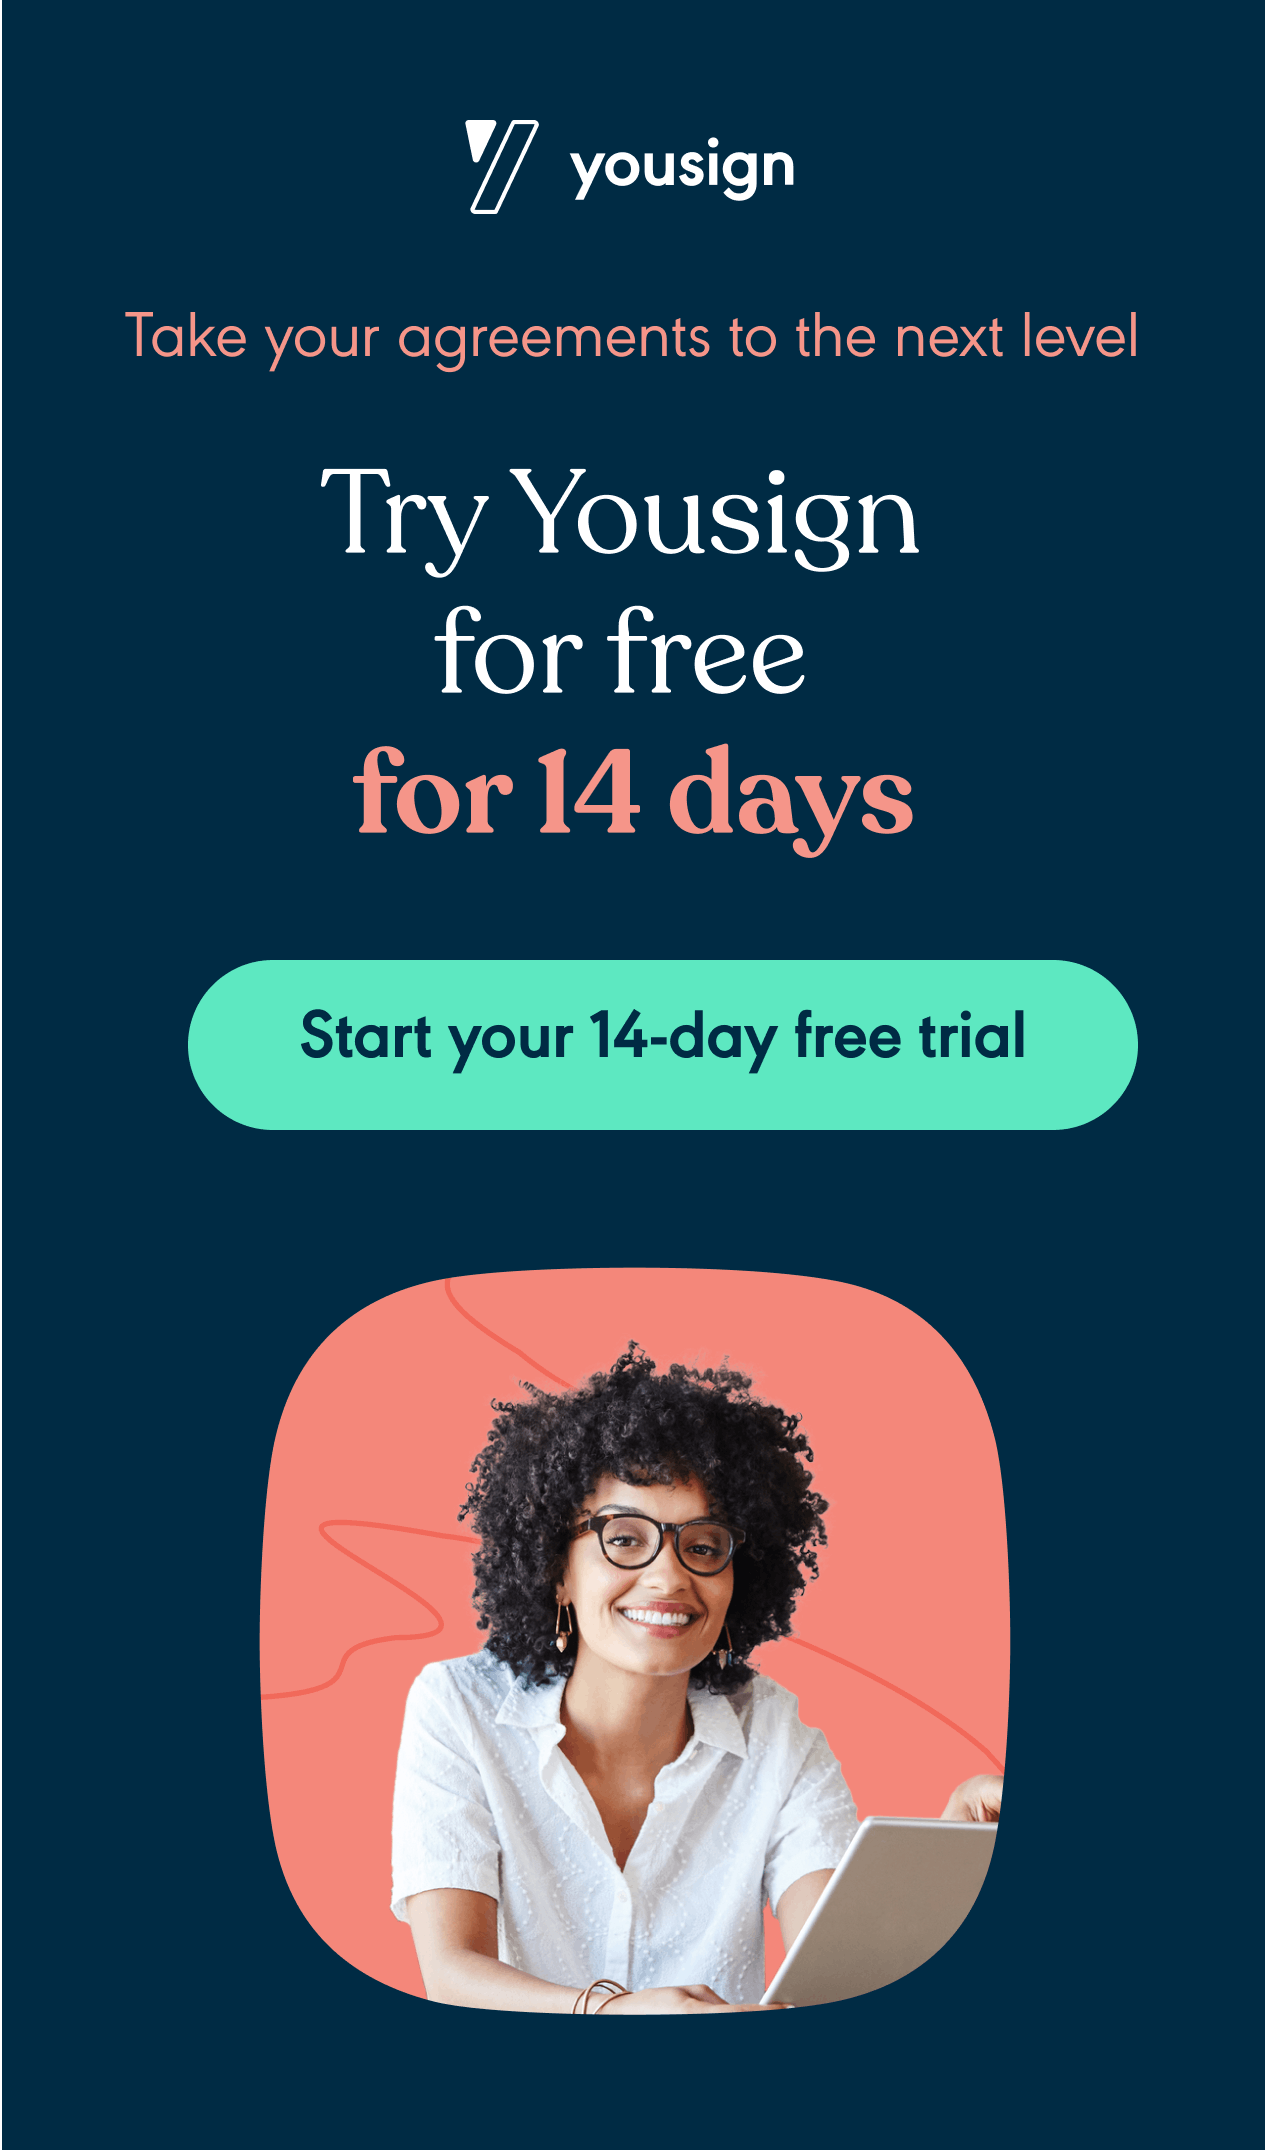 Yousign free trial